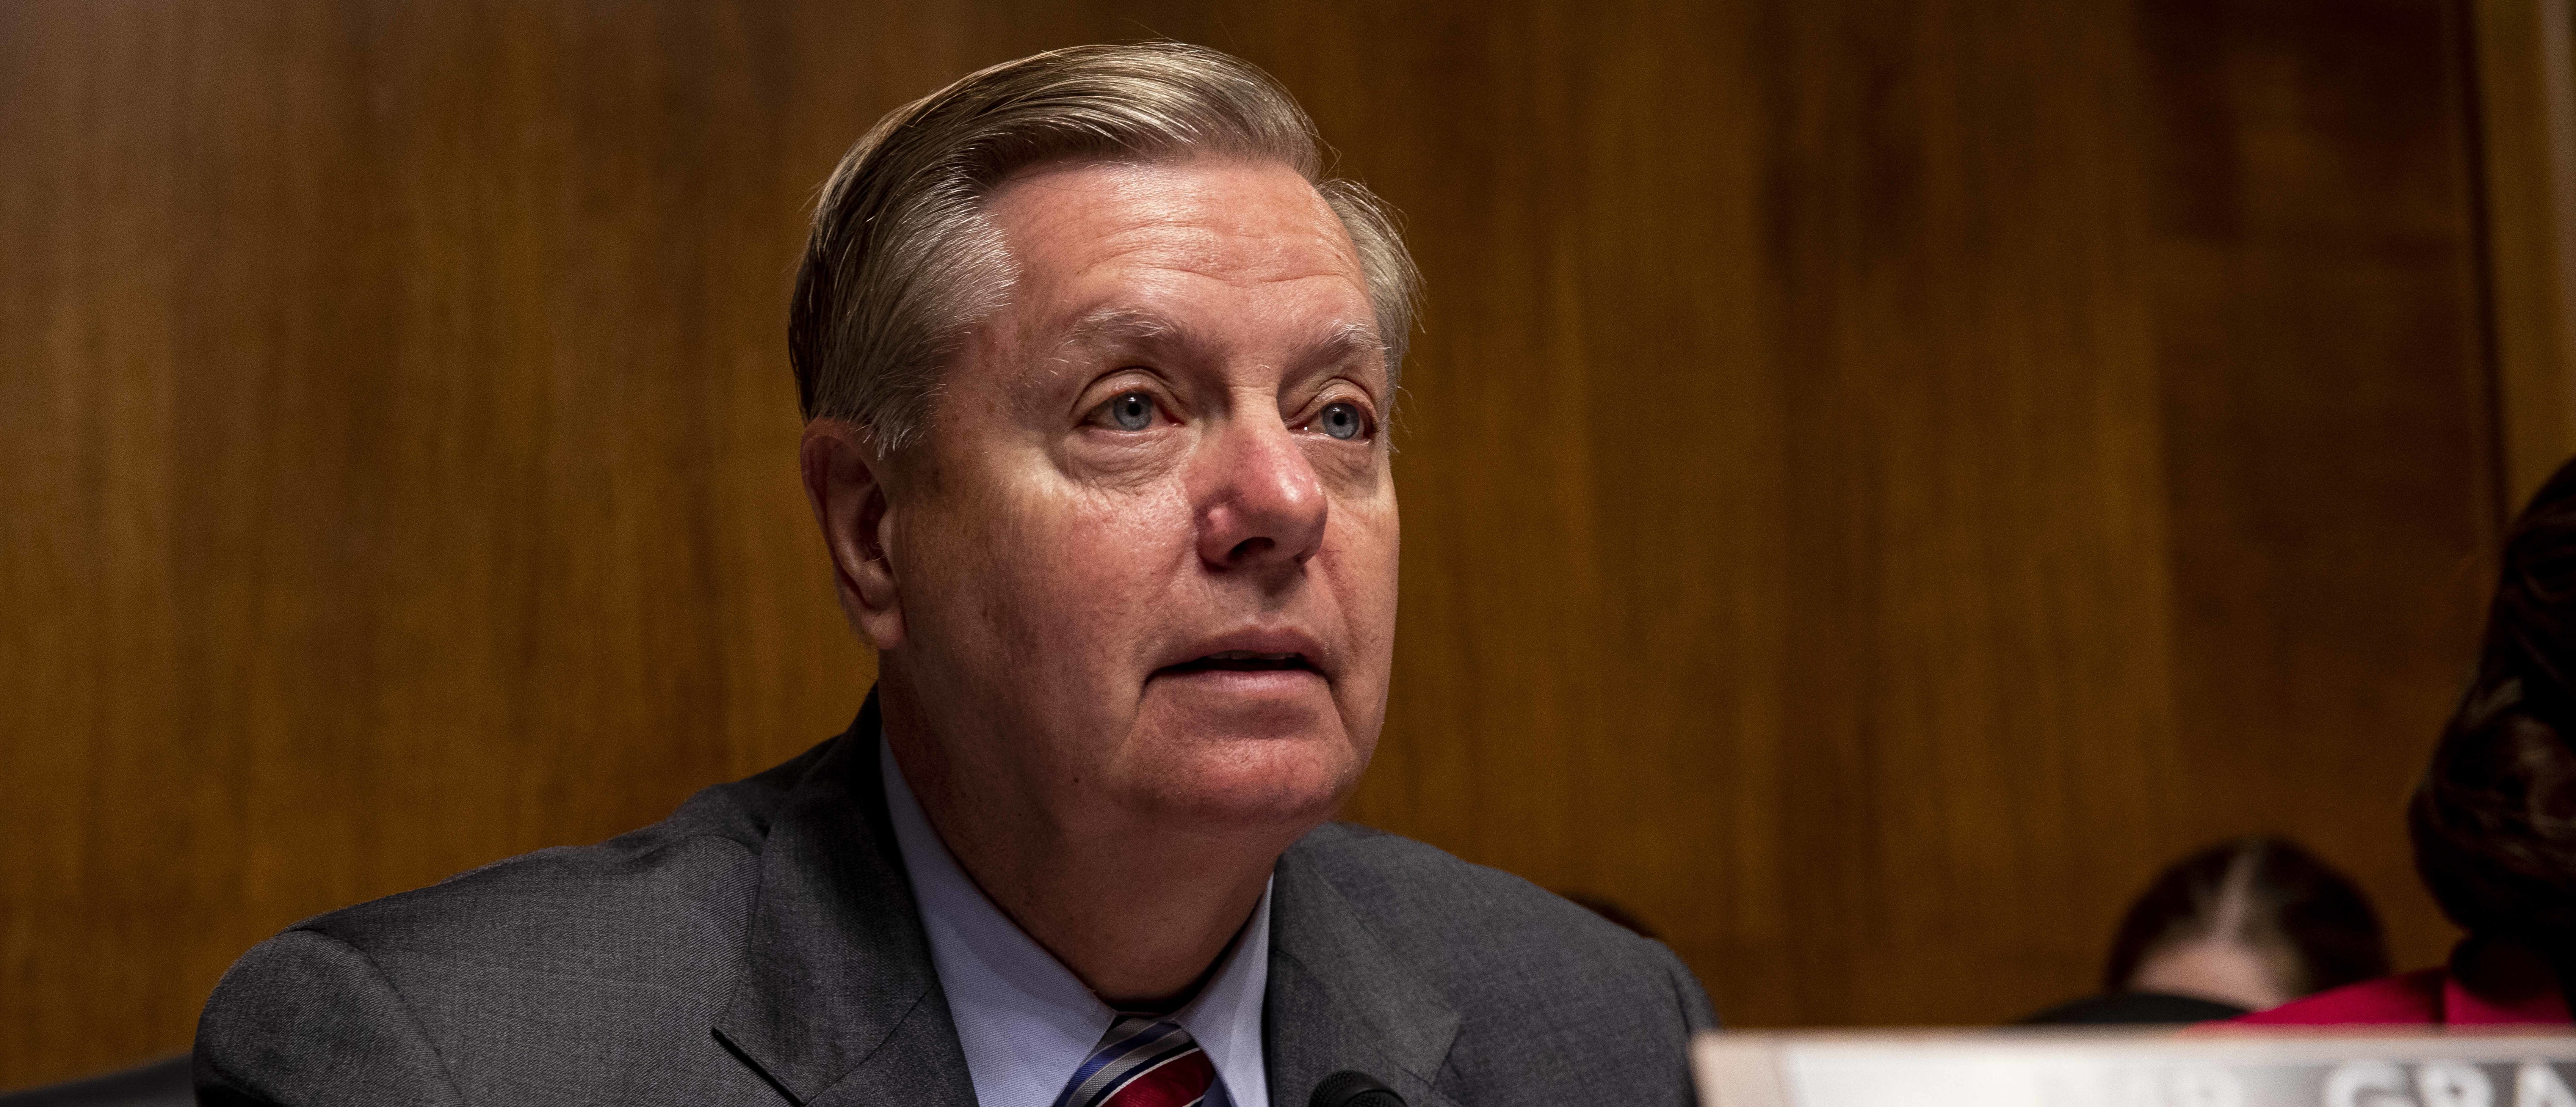 Senate Judiciary Chairman Lindsey Graham speaks during a hearing on June 11, 2019. (Anna Moneymaker/Getty Images)